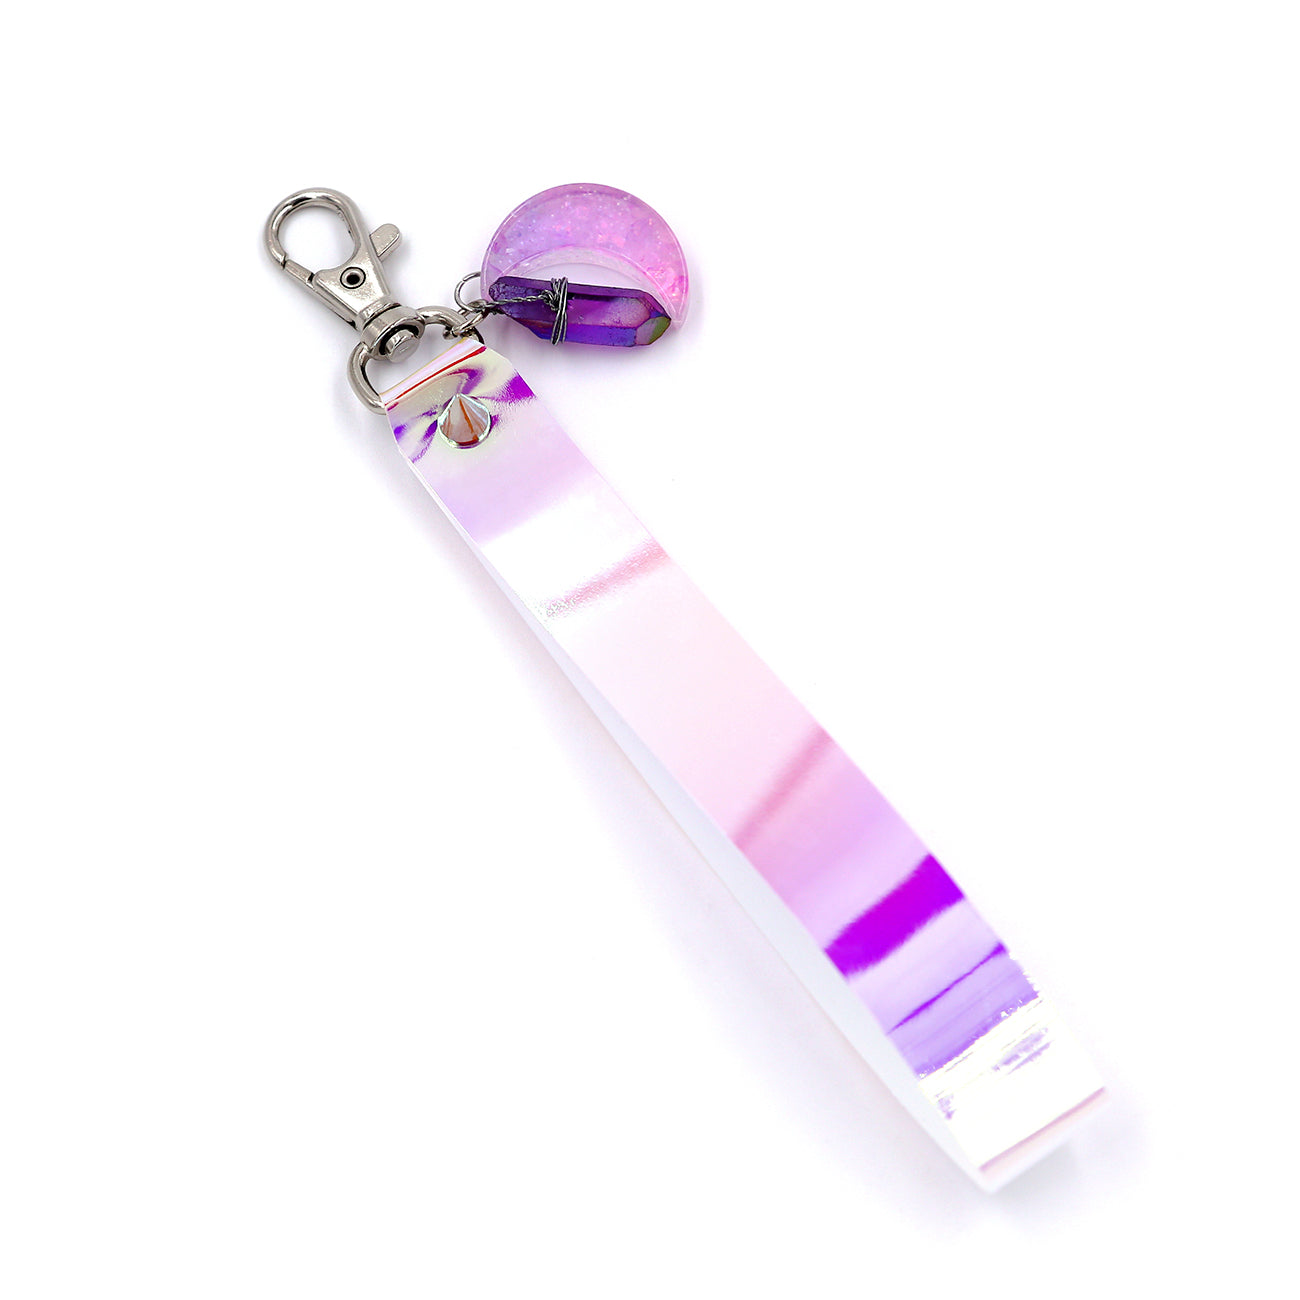 Holographic keystrap with silver clasp and pink moon charm on white background.